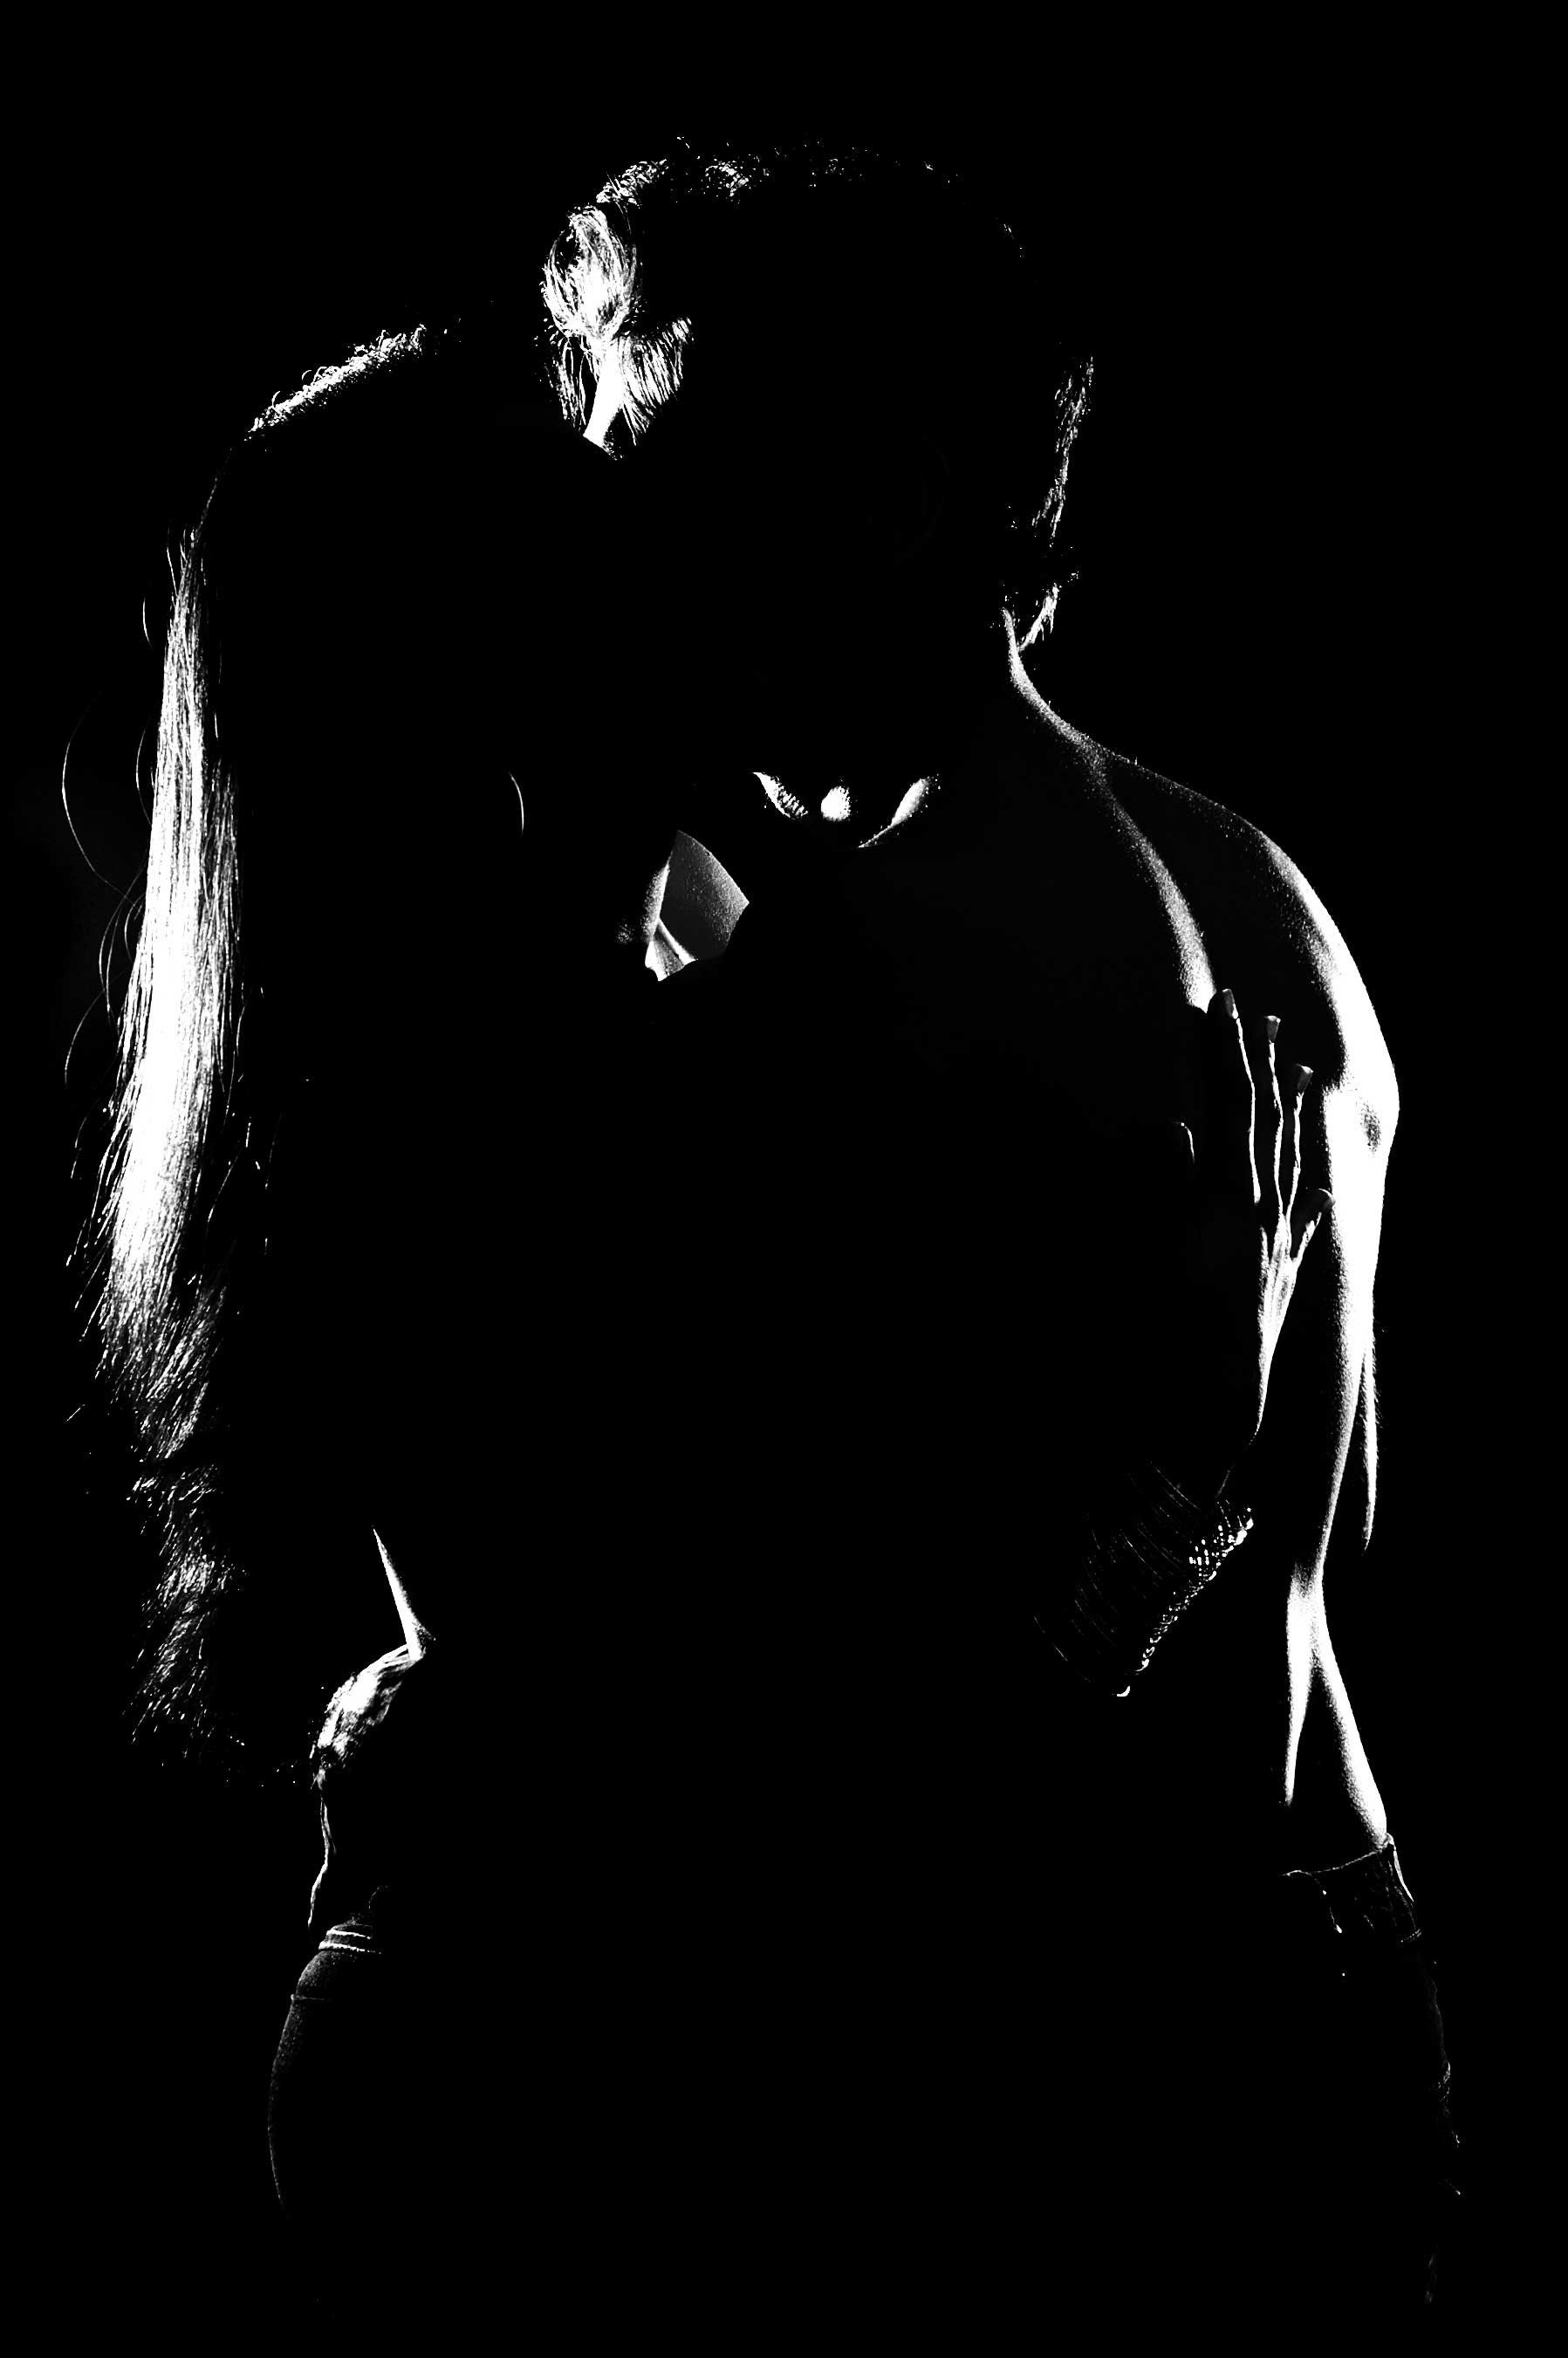 Hot Couple Kissing Image Black Pictures Of Love